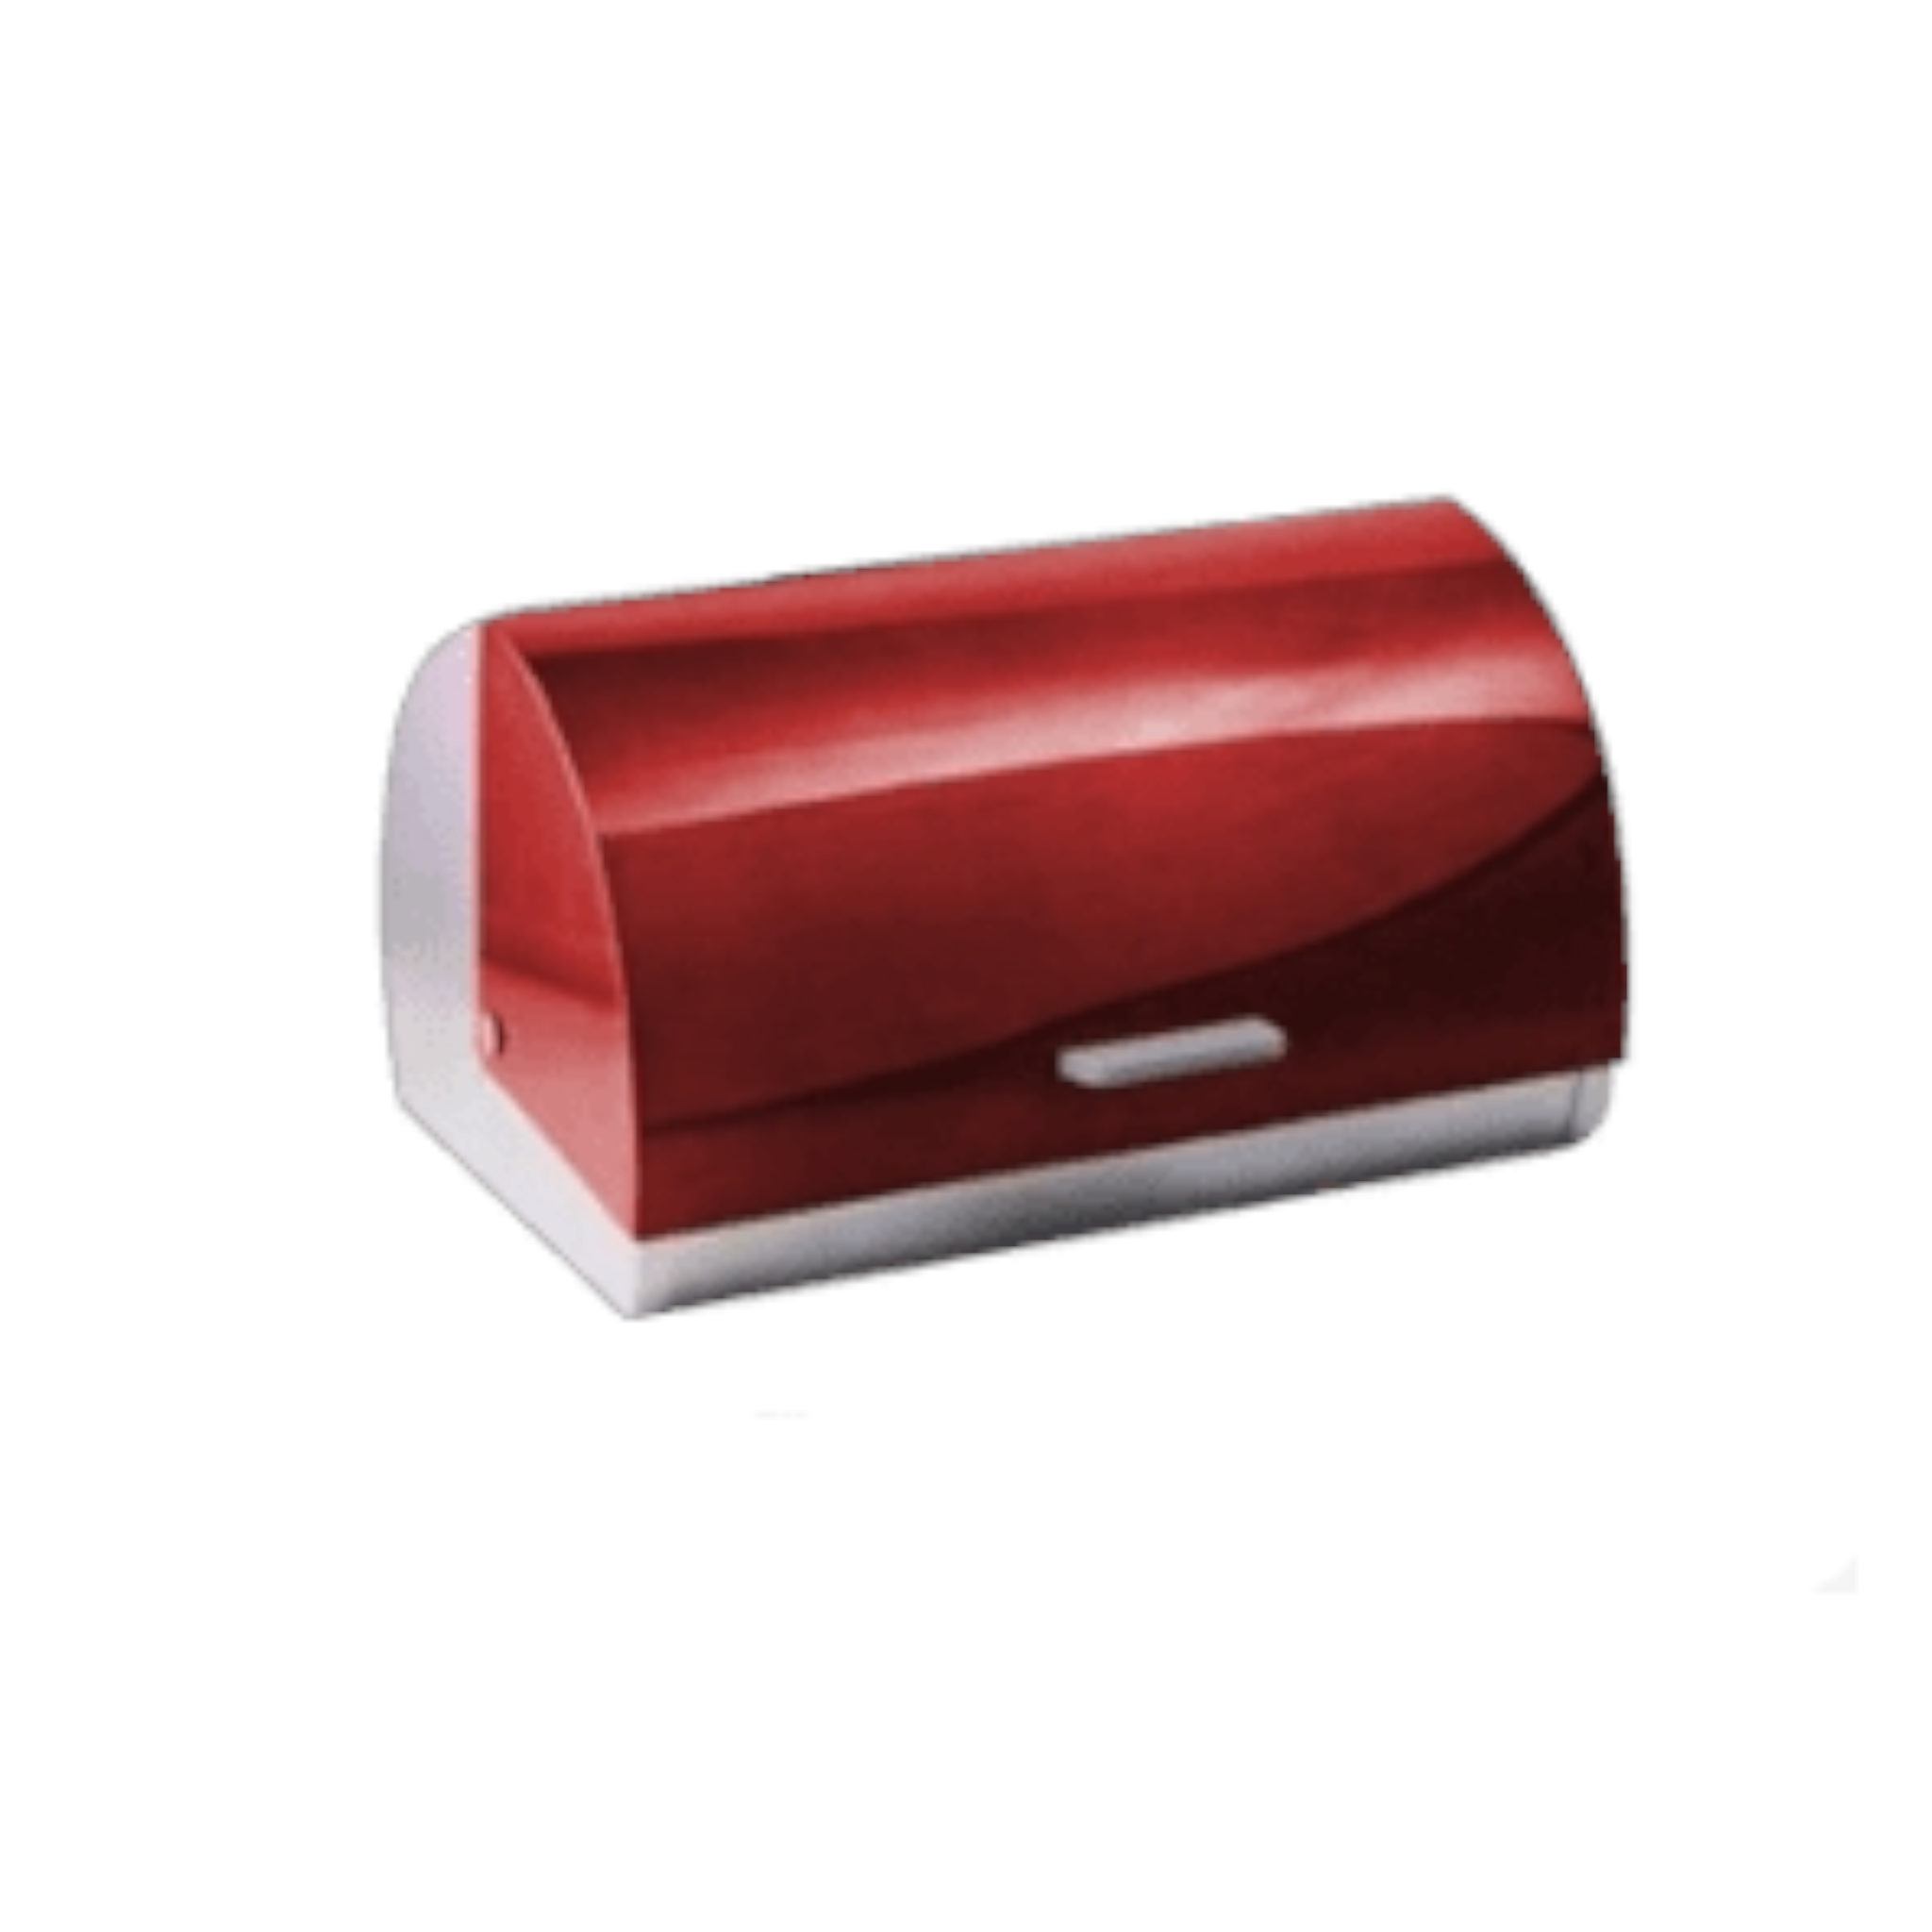 Totally Home Bread Bin Stainless Steel with Red Lid